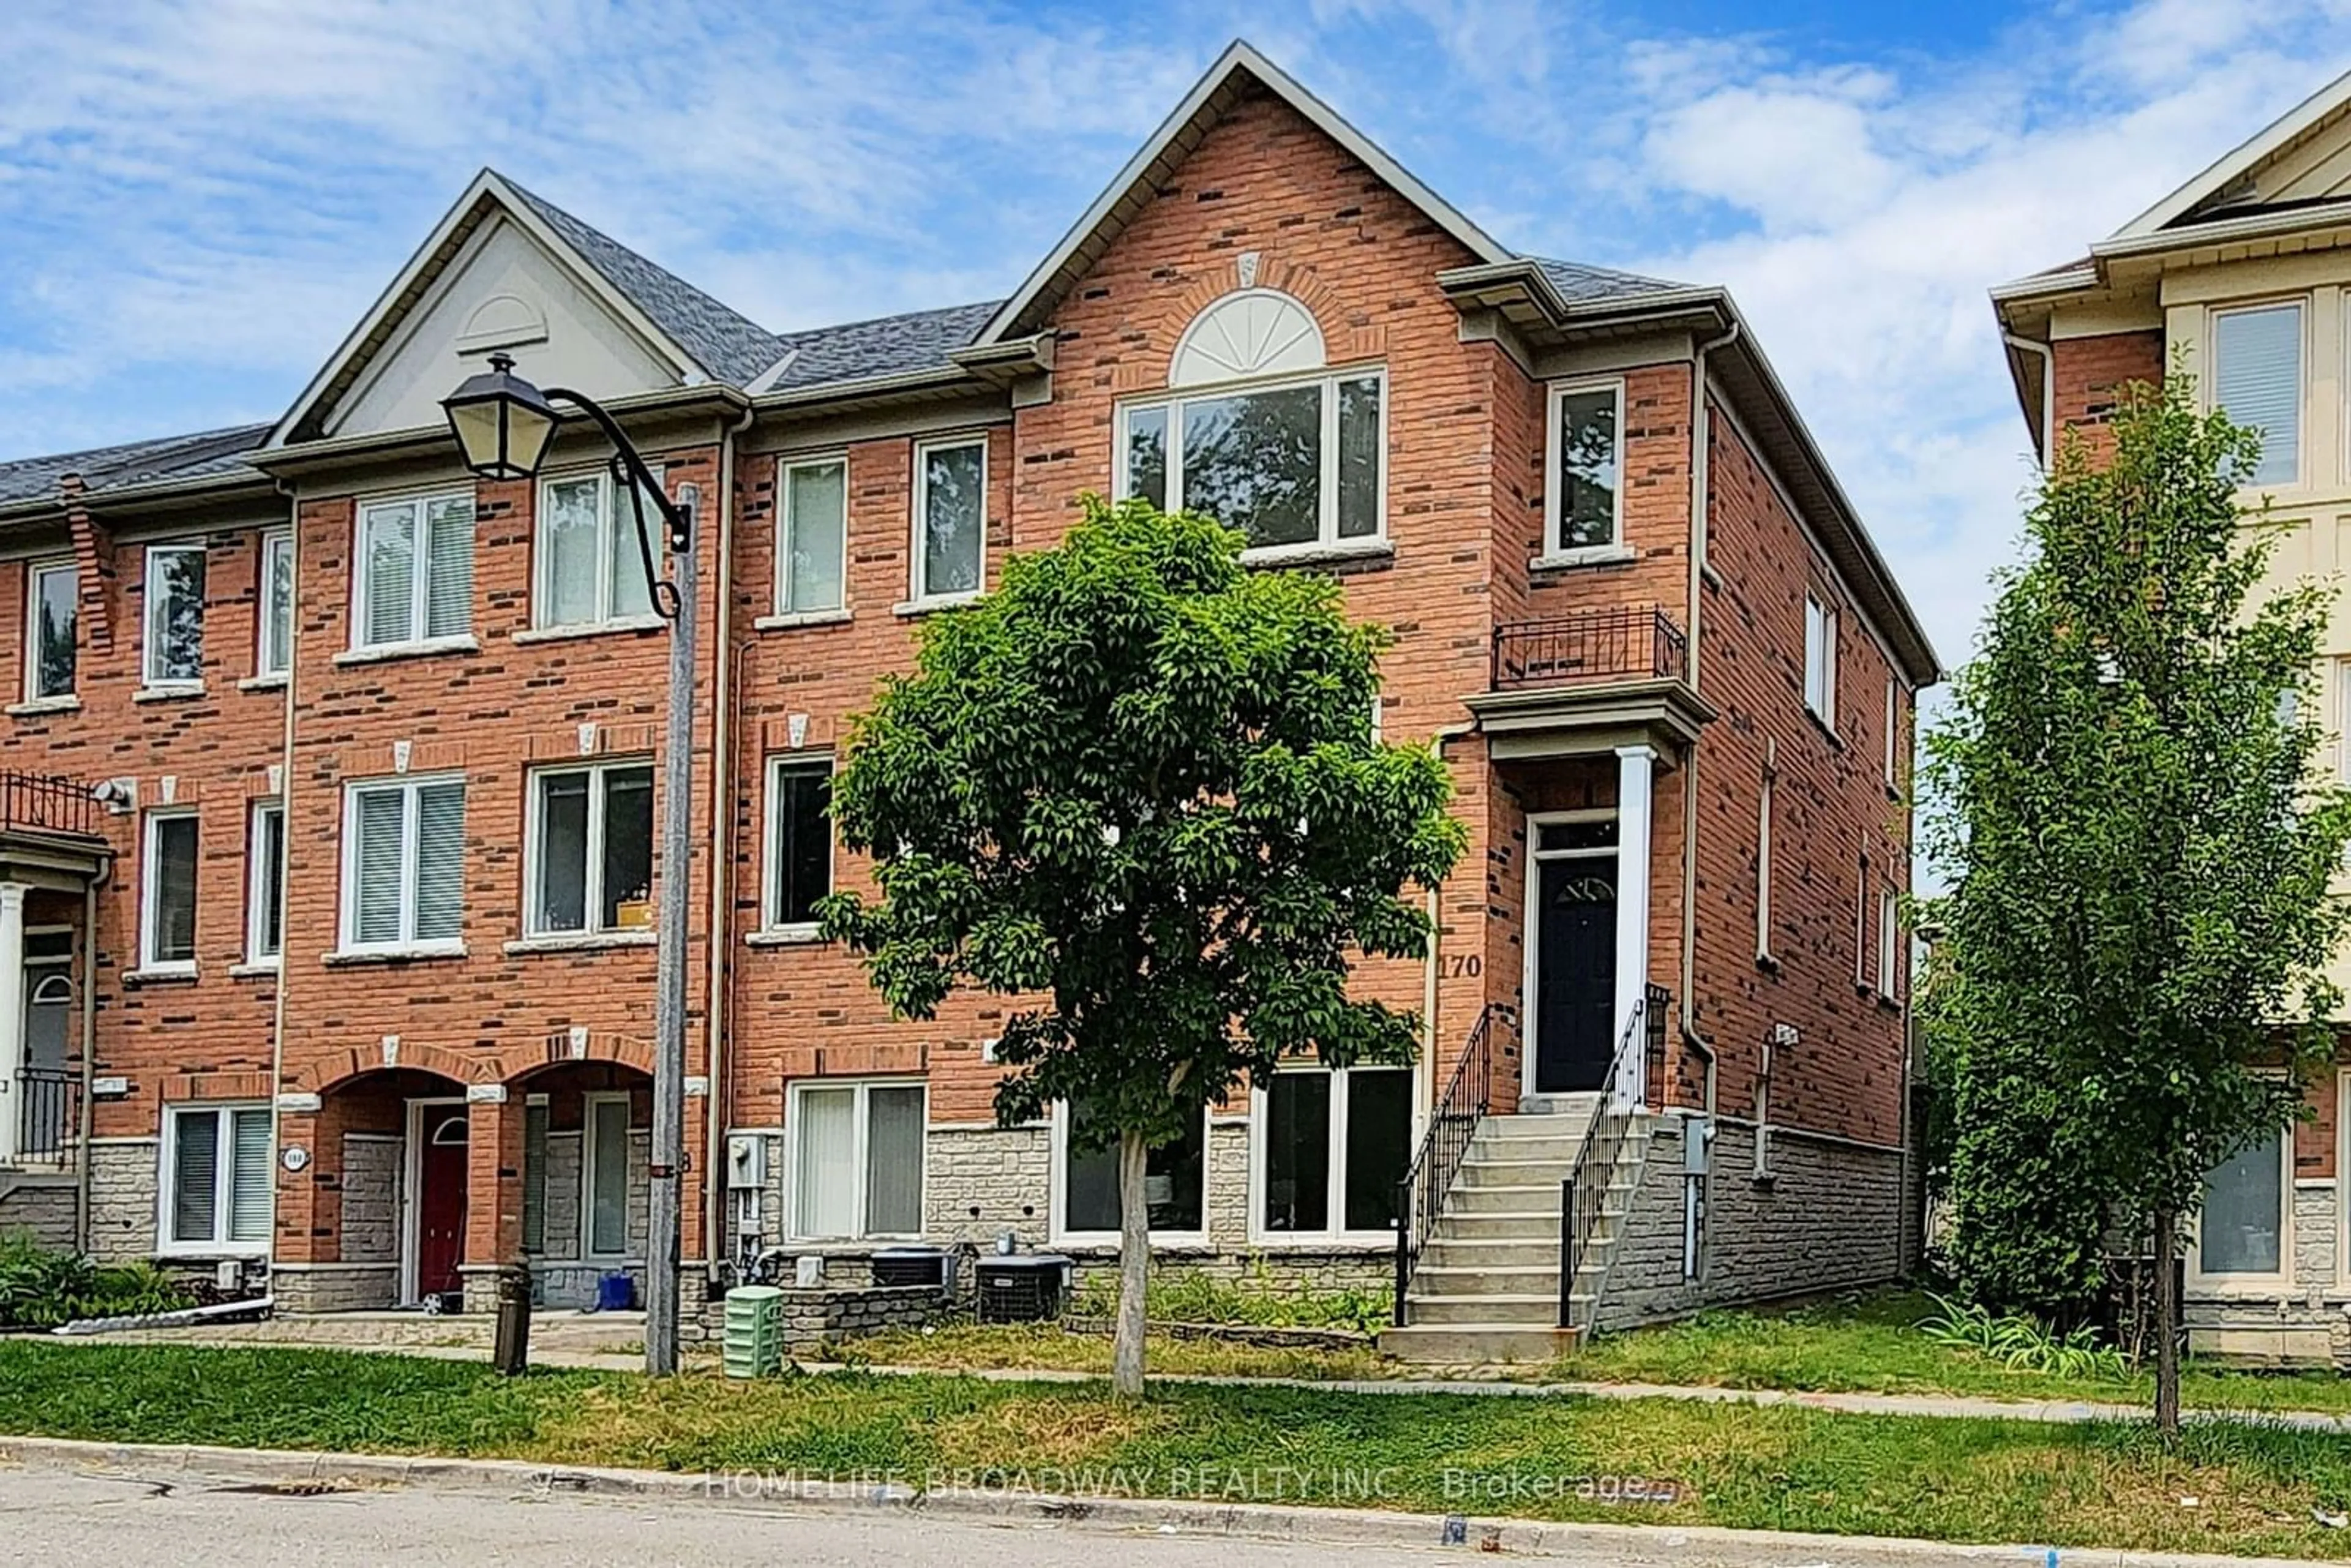 Home with brick exterior material for 170 Galleria Pkwy, Markham Ontario L3T 7V2